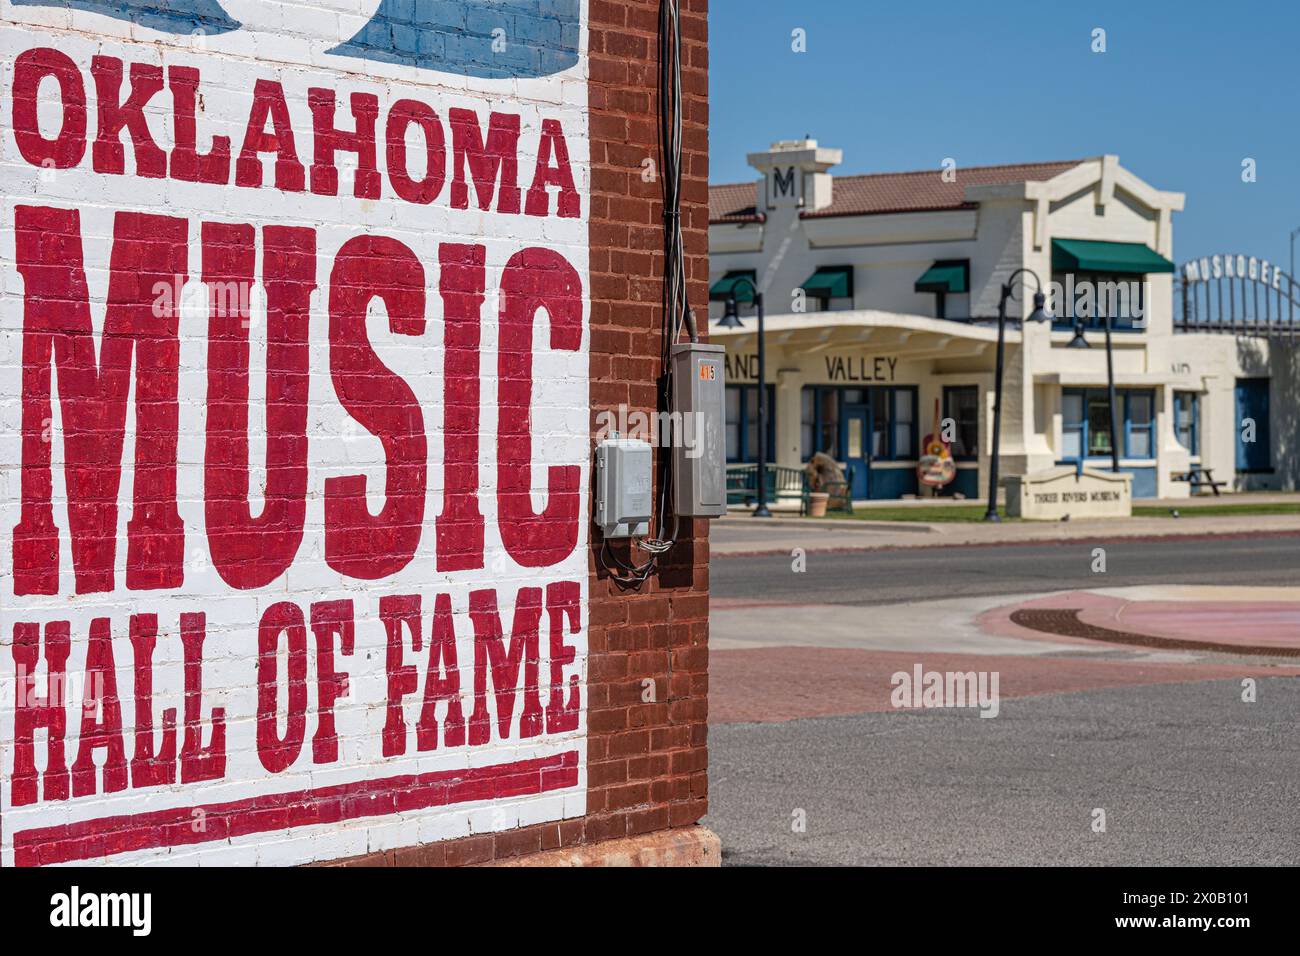 The Oklahoma Music Hall of Fame and the Three Rivers Museum (in the Midland Valley Railroad Depot) in Muskogee, Oklahoma's Depot District. (USA) Stock Photo